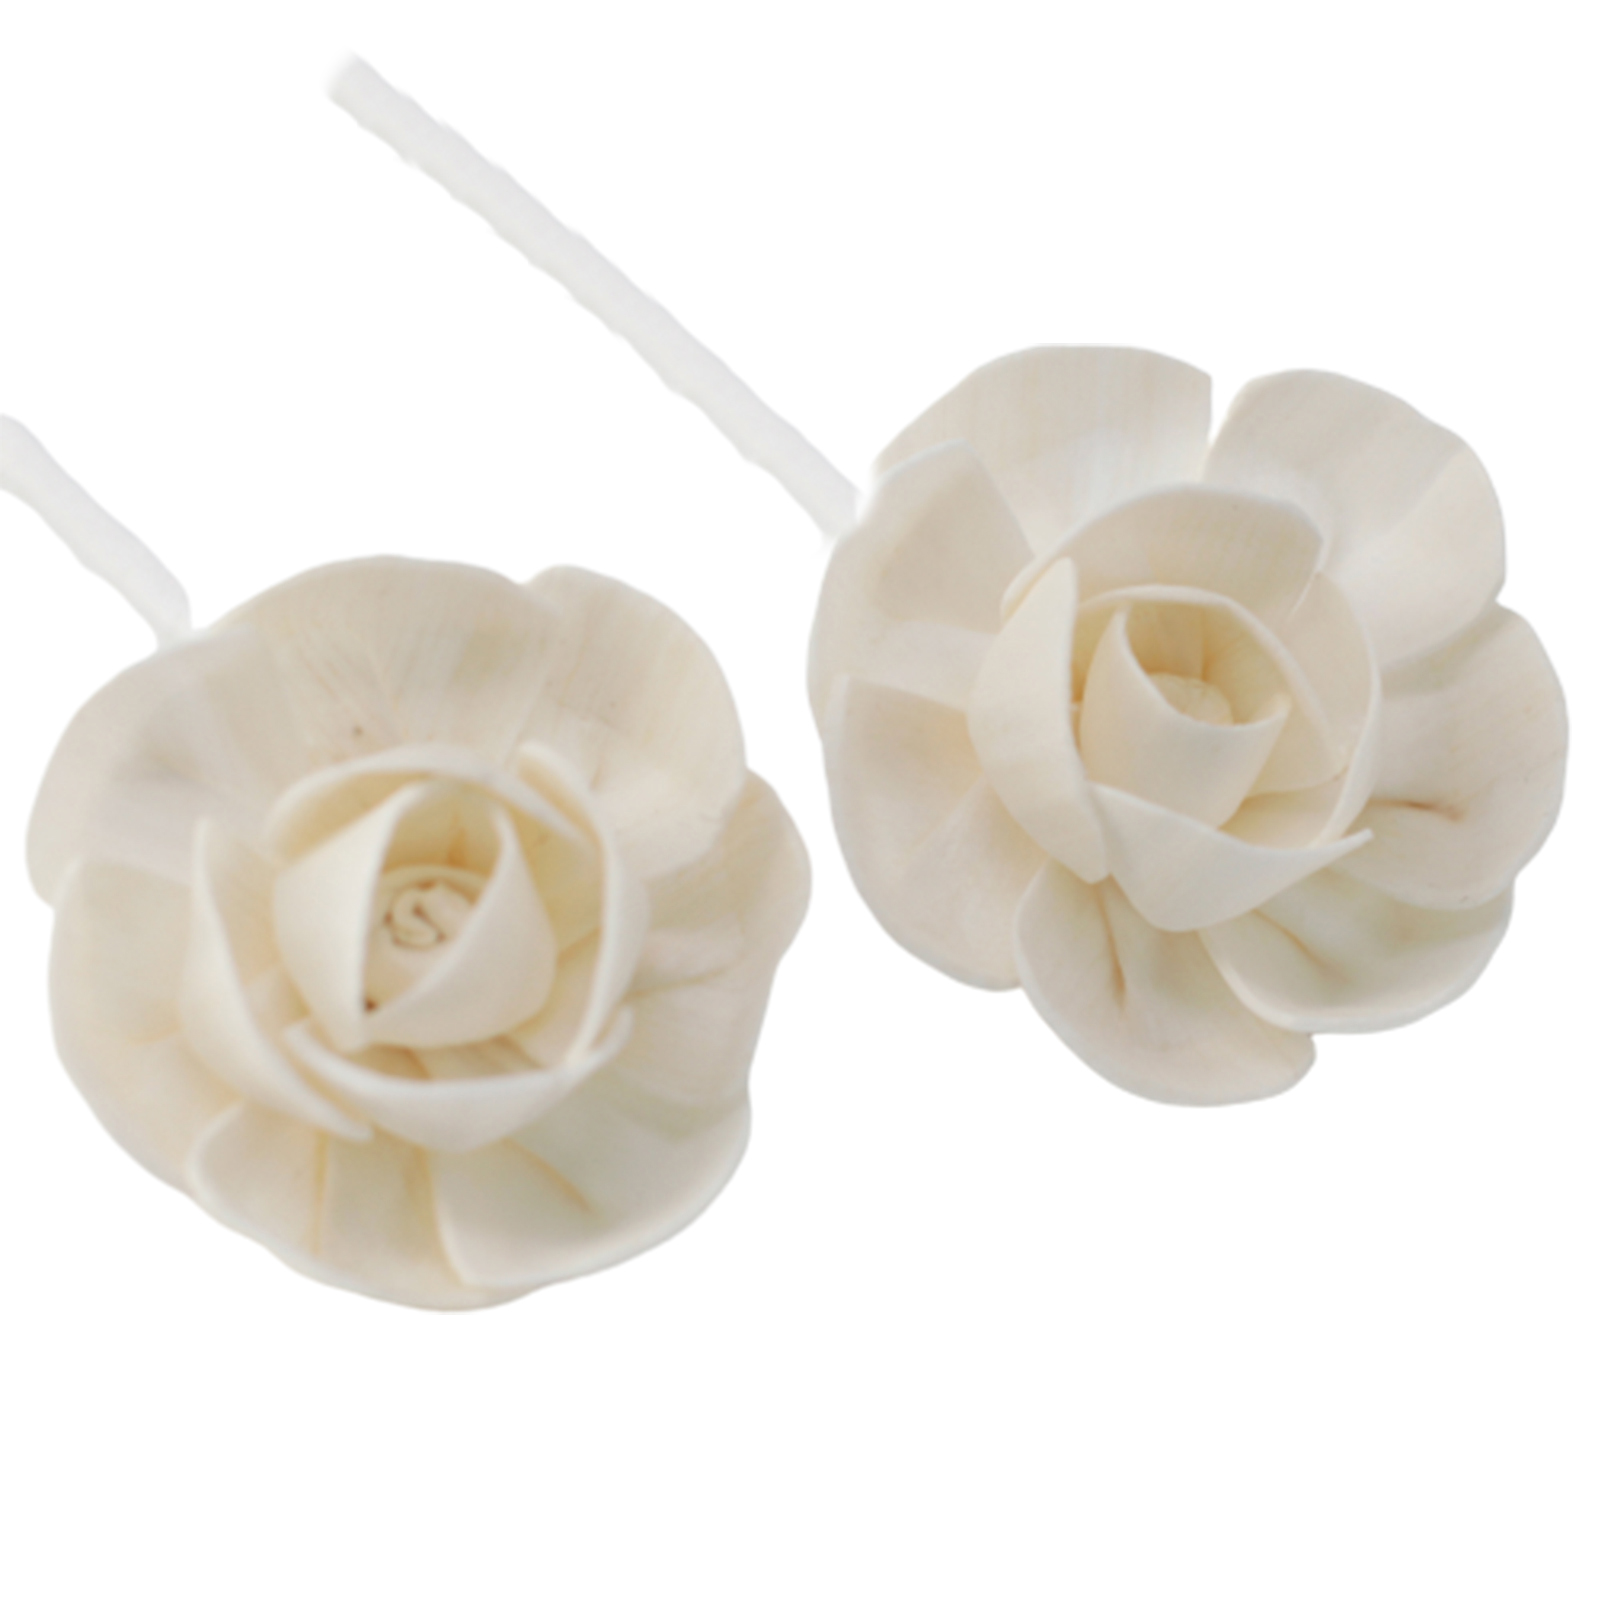 12 x Natural Diffuser Flowers - Small Lotus on String